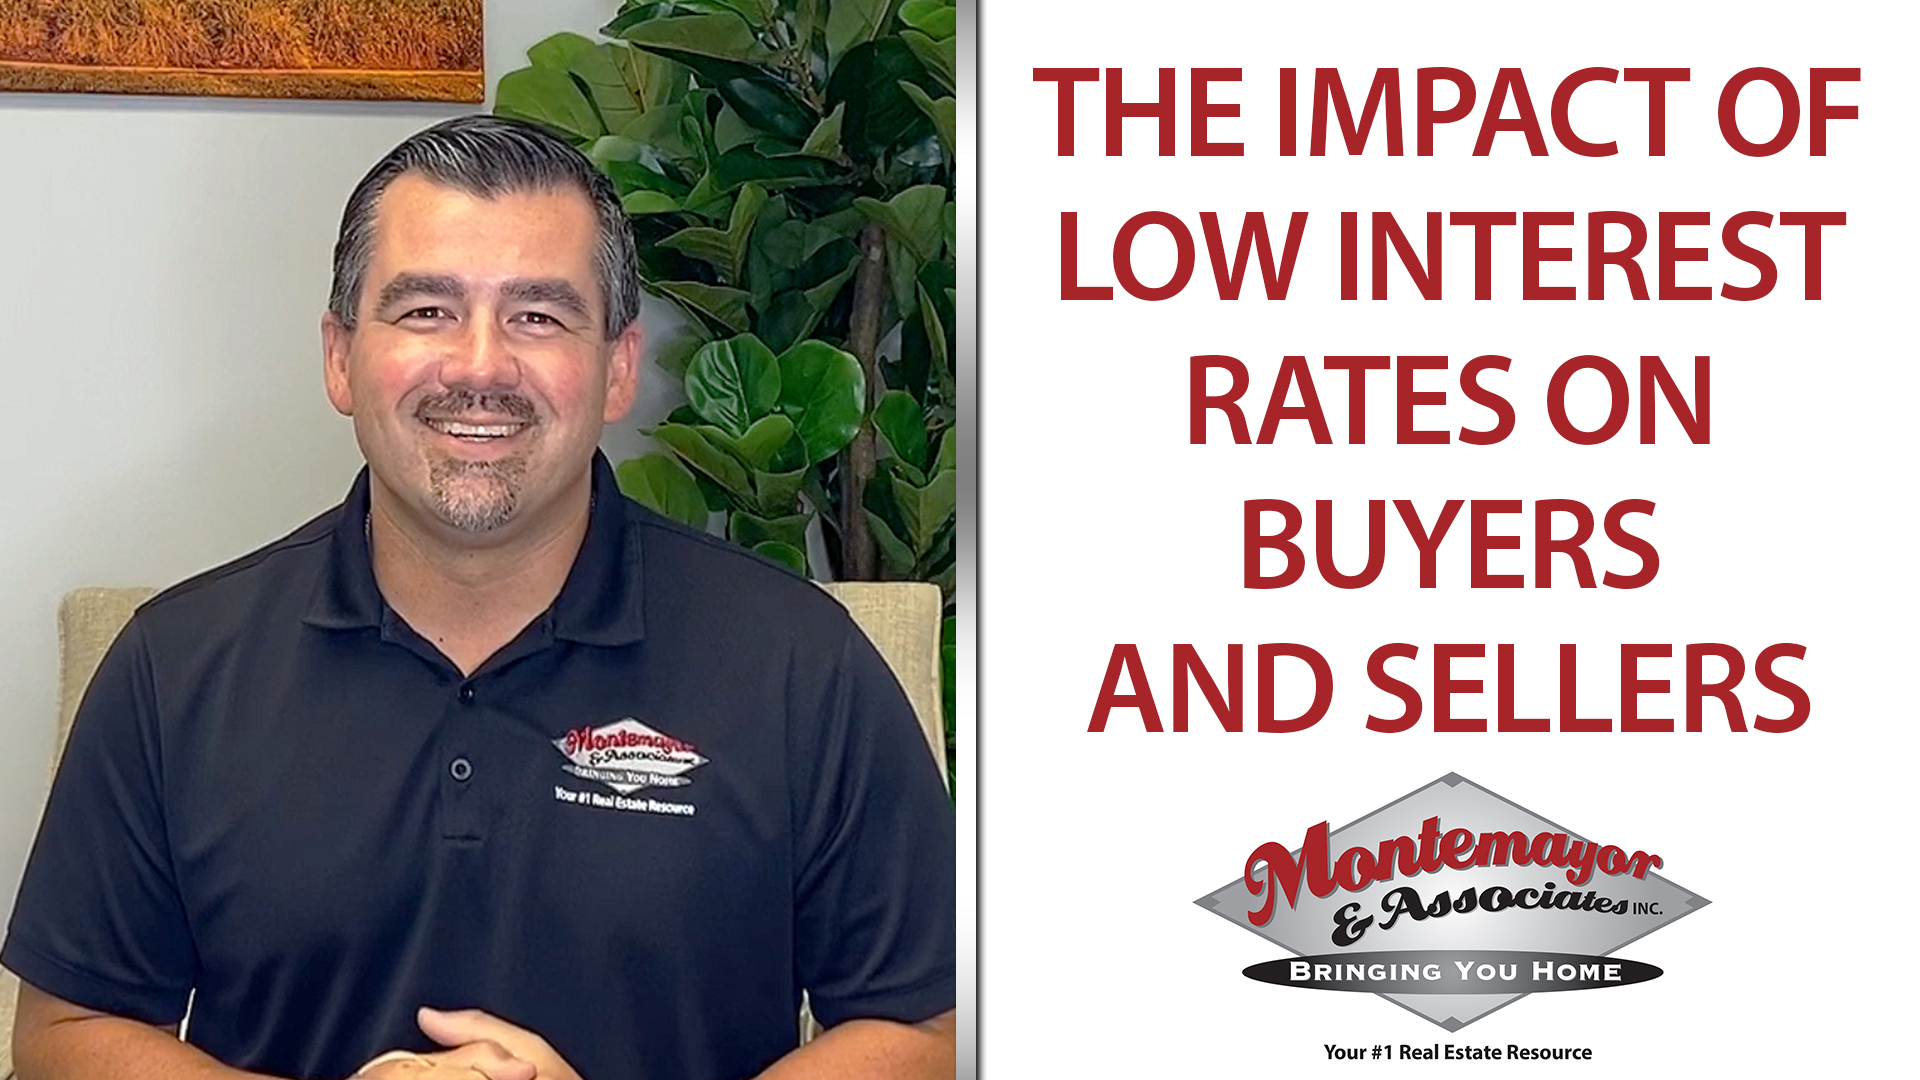 How Do Low Interest Rates Impact Buying and Selling?